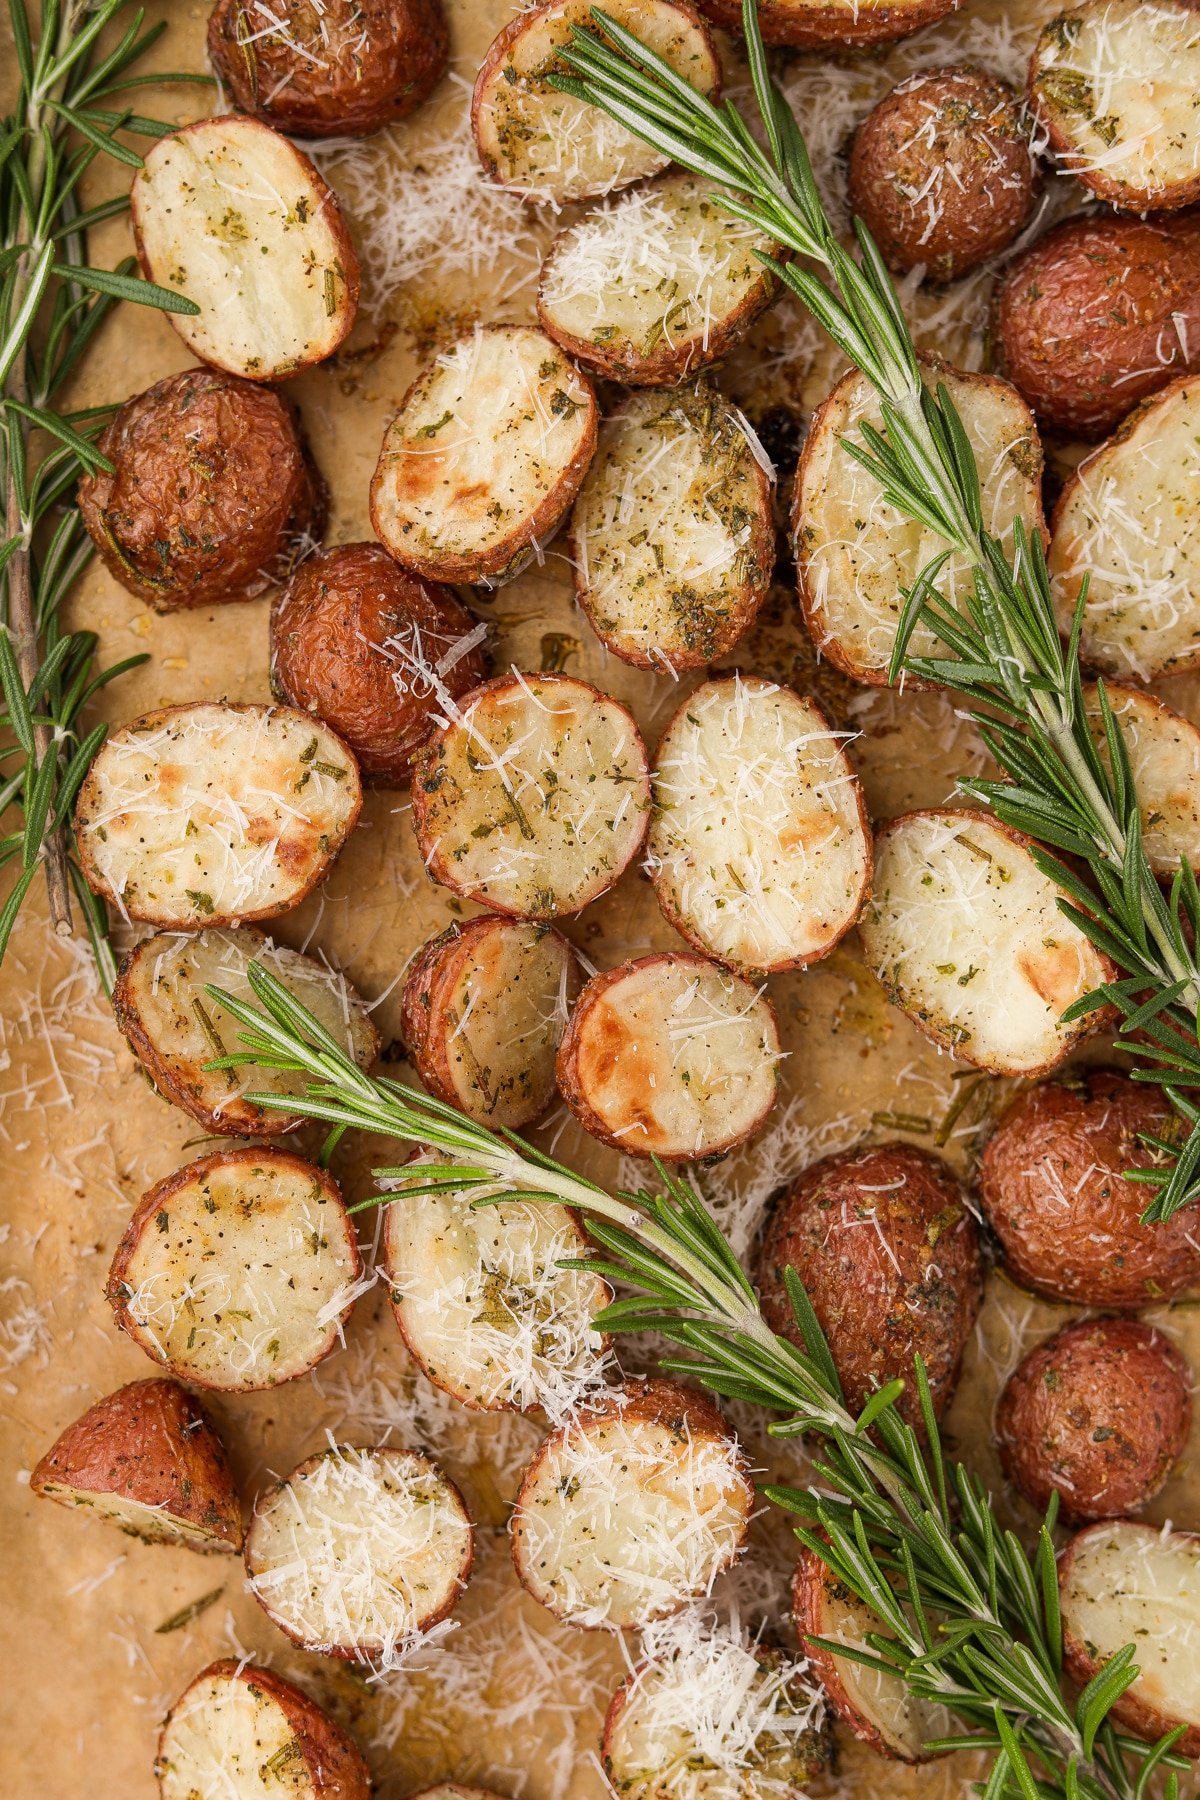 Halved roasted baby potatoes on a parchment lined baking sheet, garnished with parmesan cheese and fresh sprigs of rosemary.